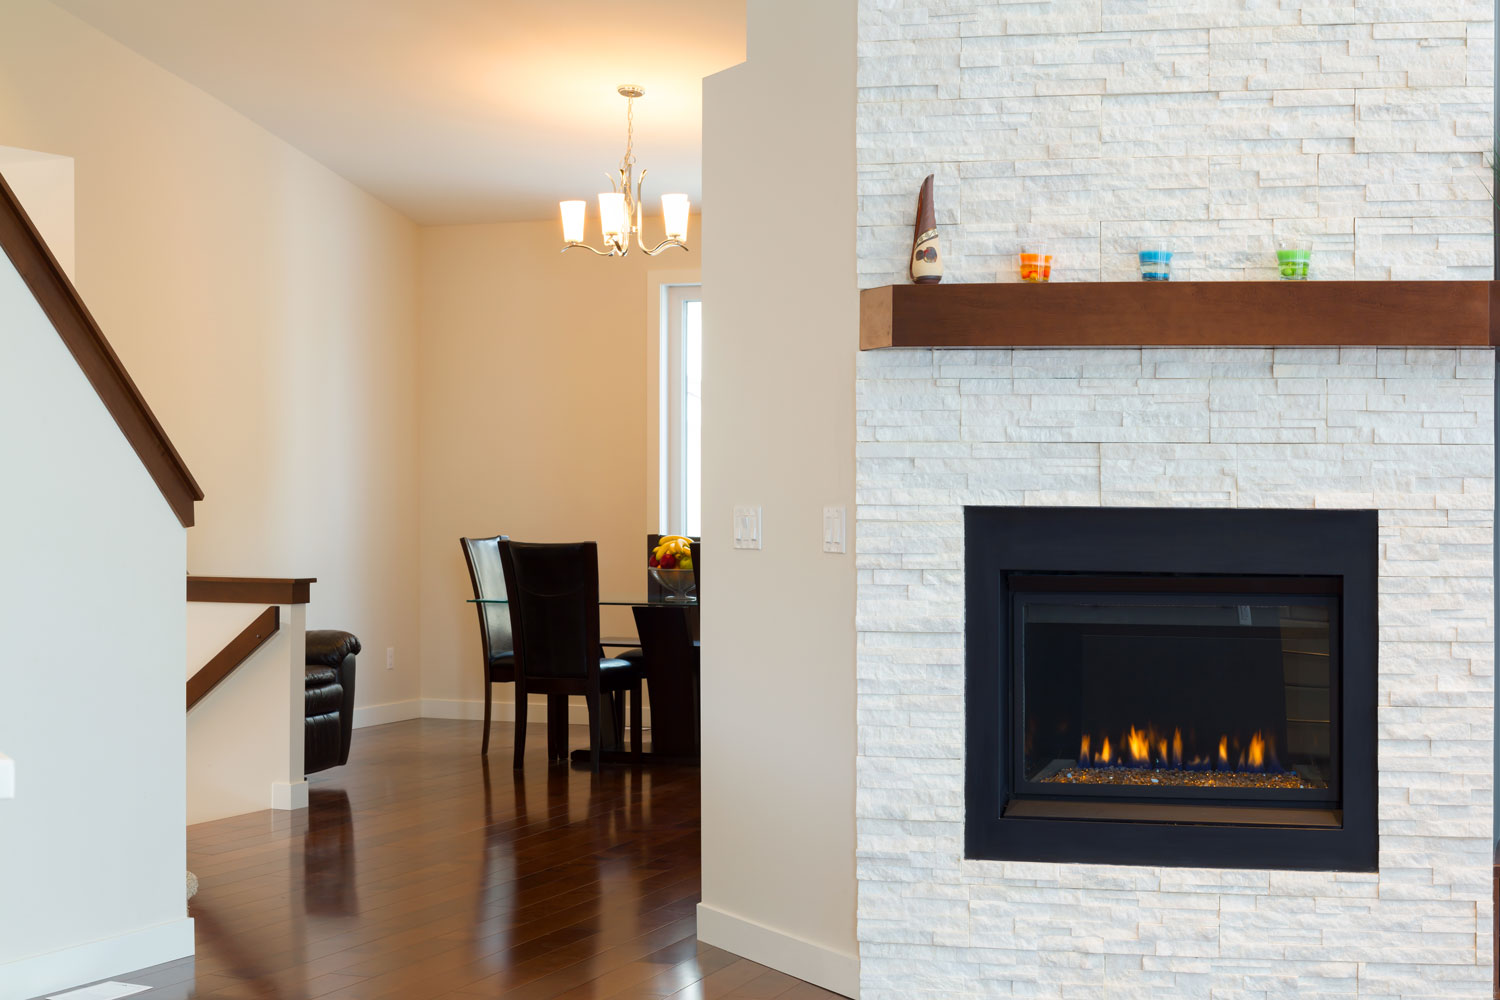 A white mantel fireplace inside a luxurious living room with wooden flooring and beige painted walls